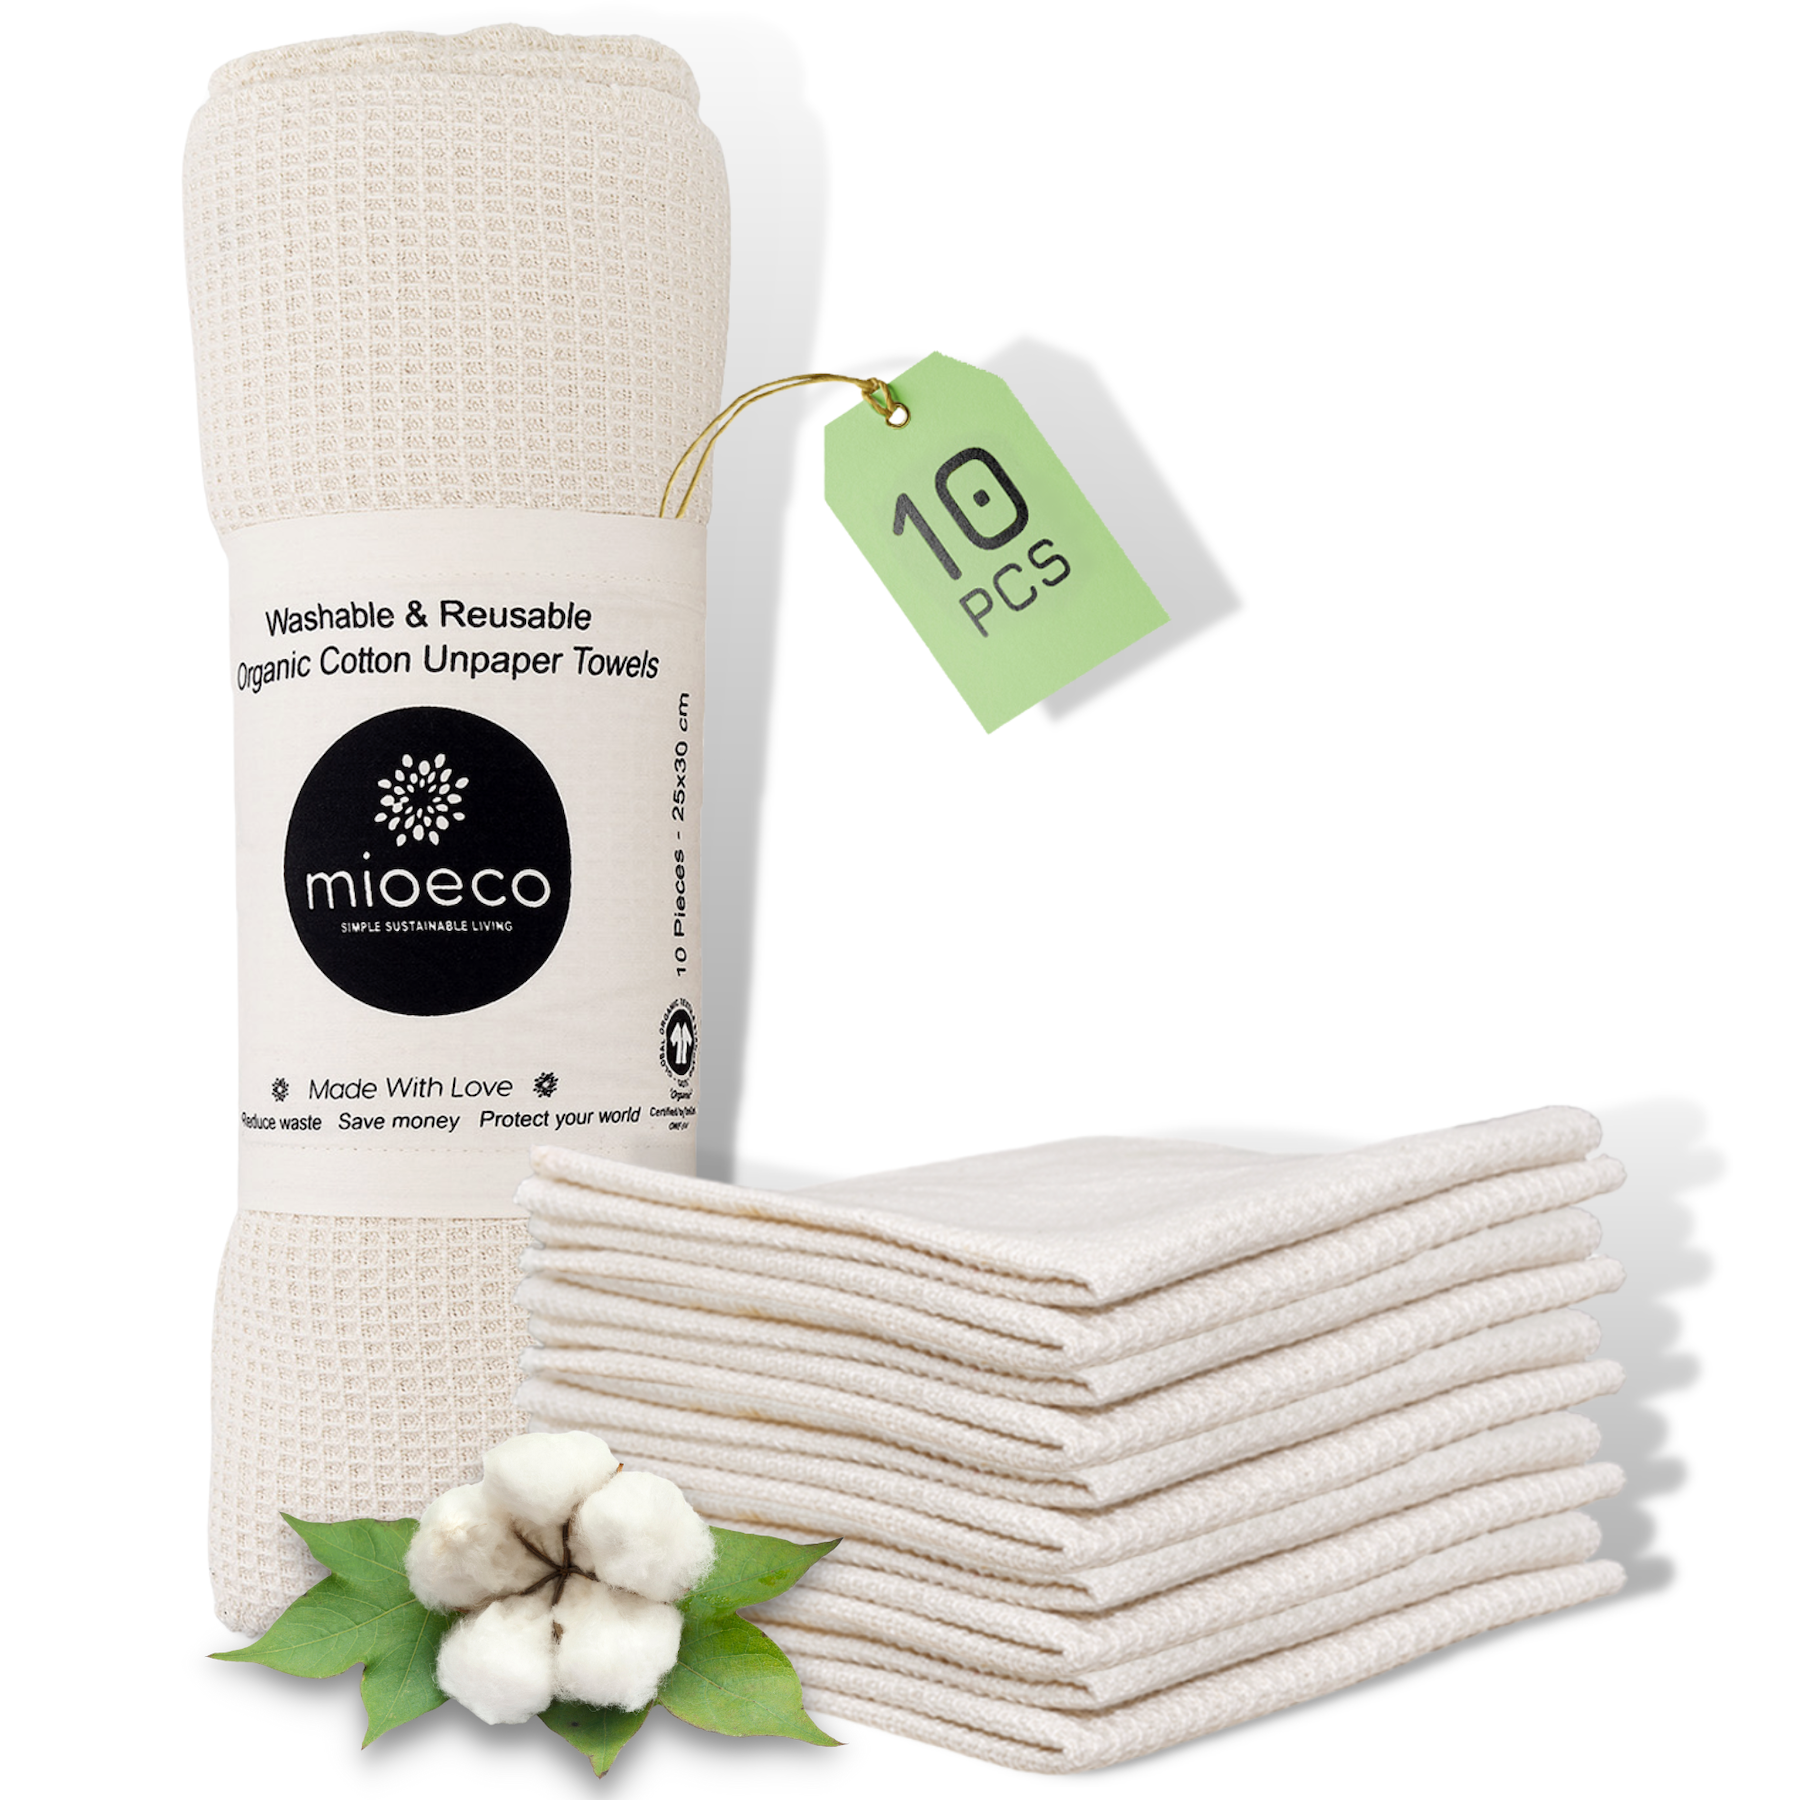 Mioeco Reusable paper towel pack of 10